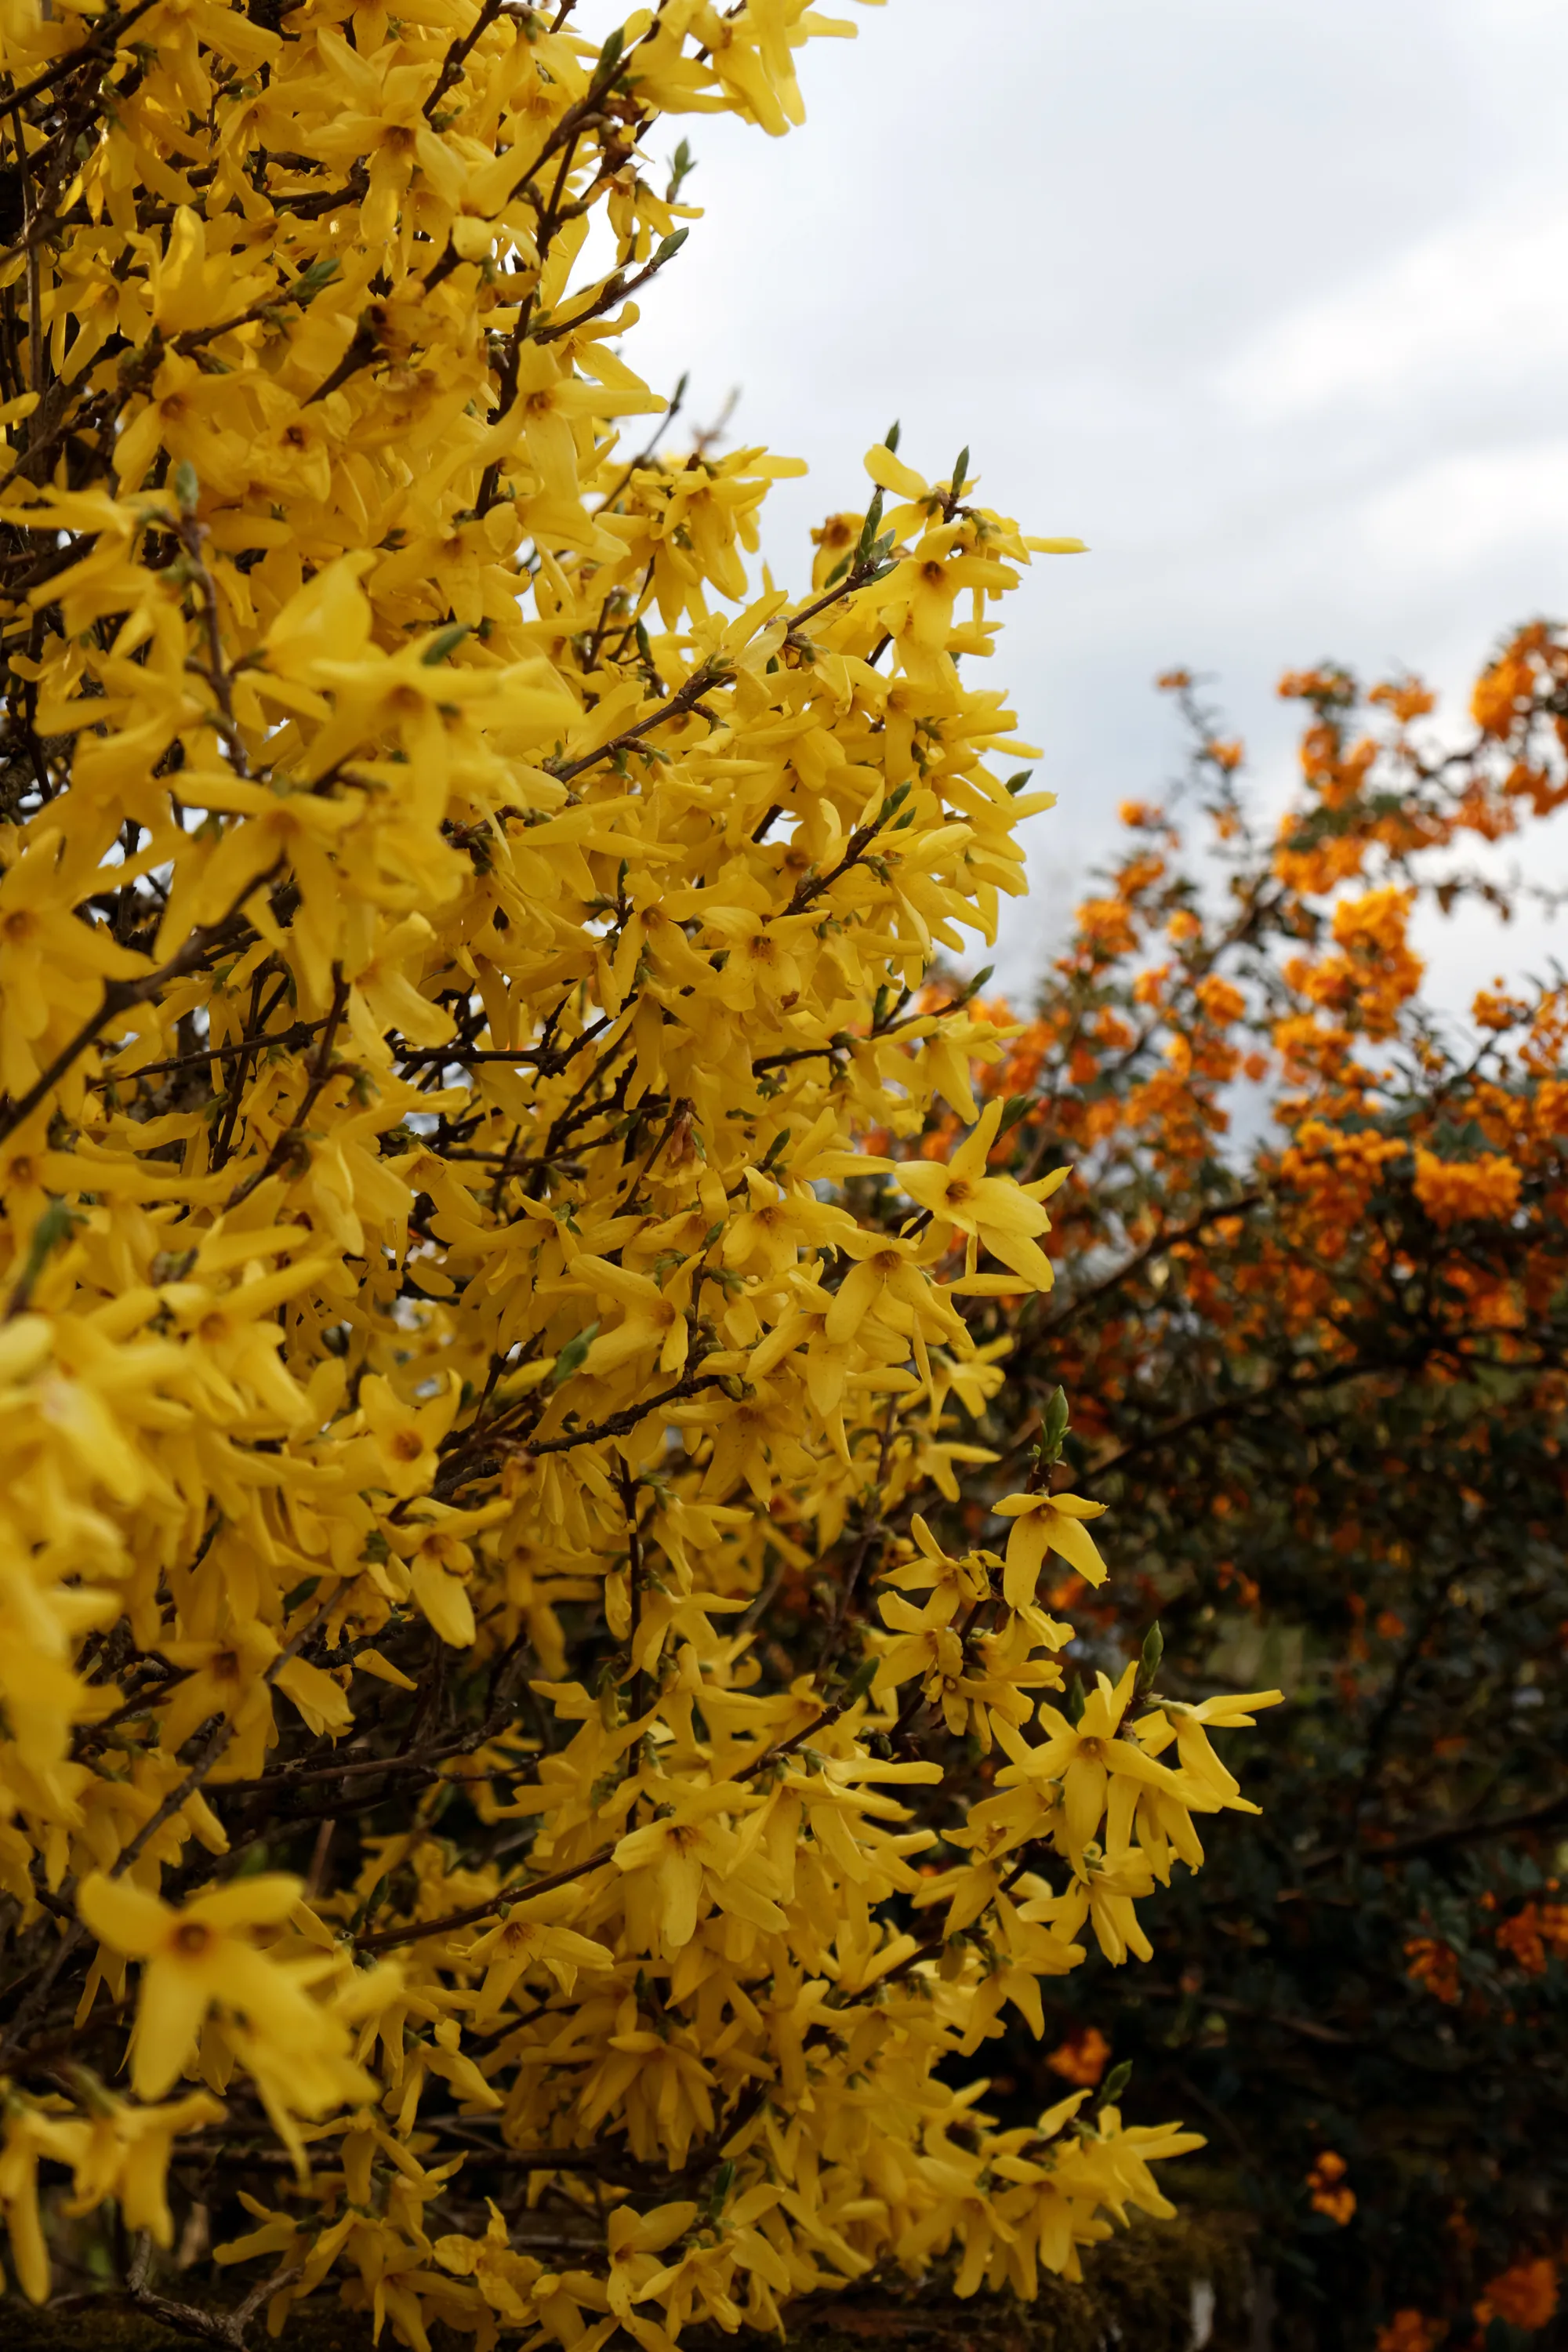 Photo showing: A flowering Forsythia shrub backed by a Berberis darwinii, at the east of the civil parish of Great Saling, Essex, England. Camera: Canon EOS 6D with Canon EF 24-105mm F4L IS USM lens. Software: large RAW file lens-corrected, optimized and downsized with DxO OpticsPro 10 Elite, Viewpoint 2, and Adobe Photoshop CS2.